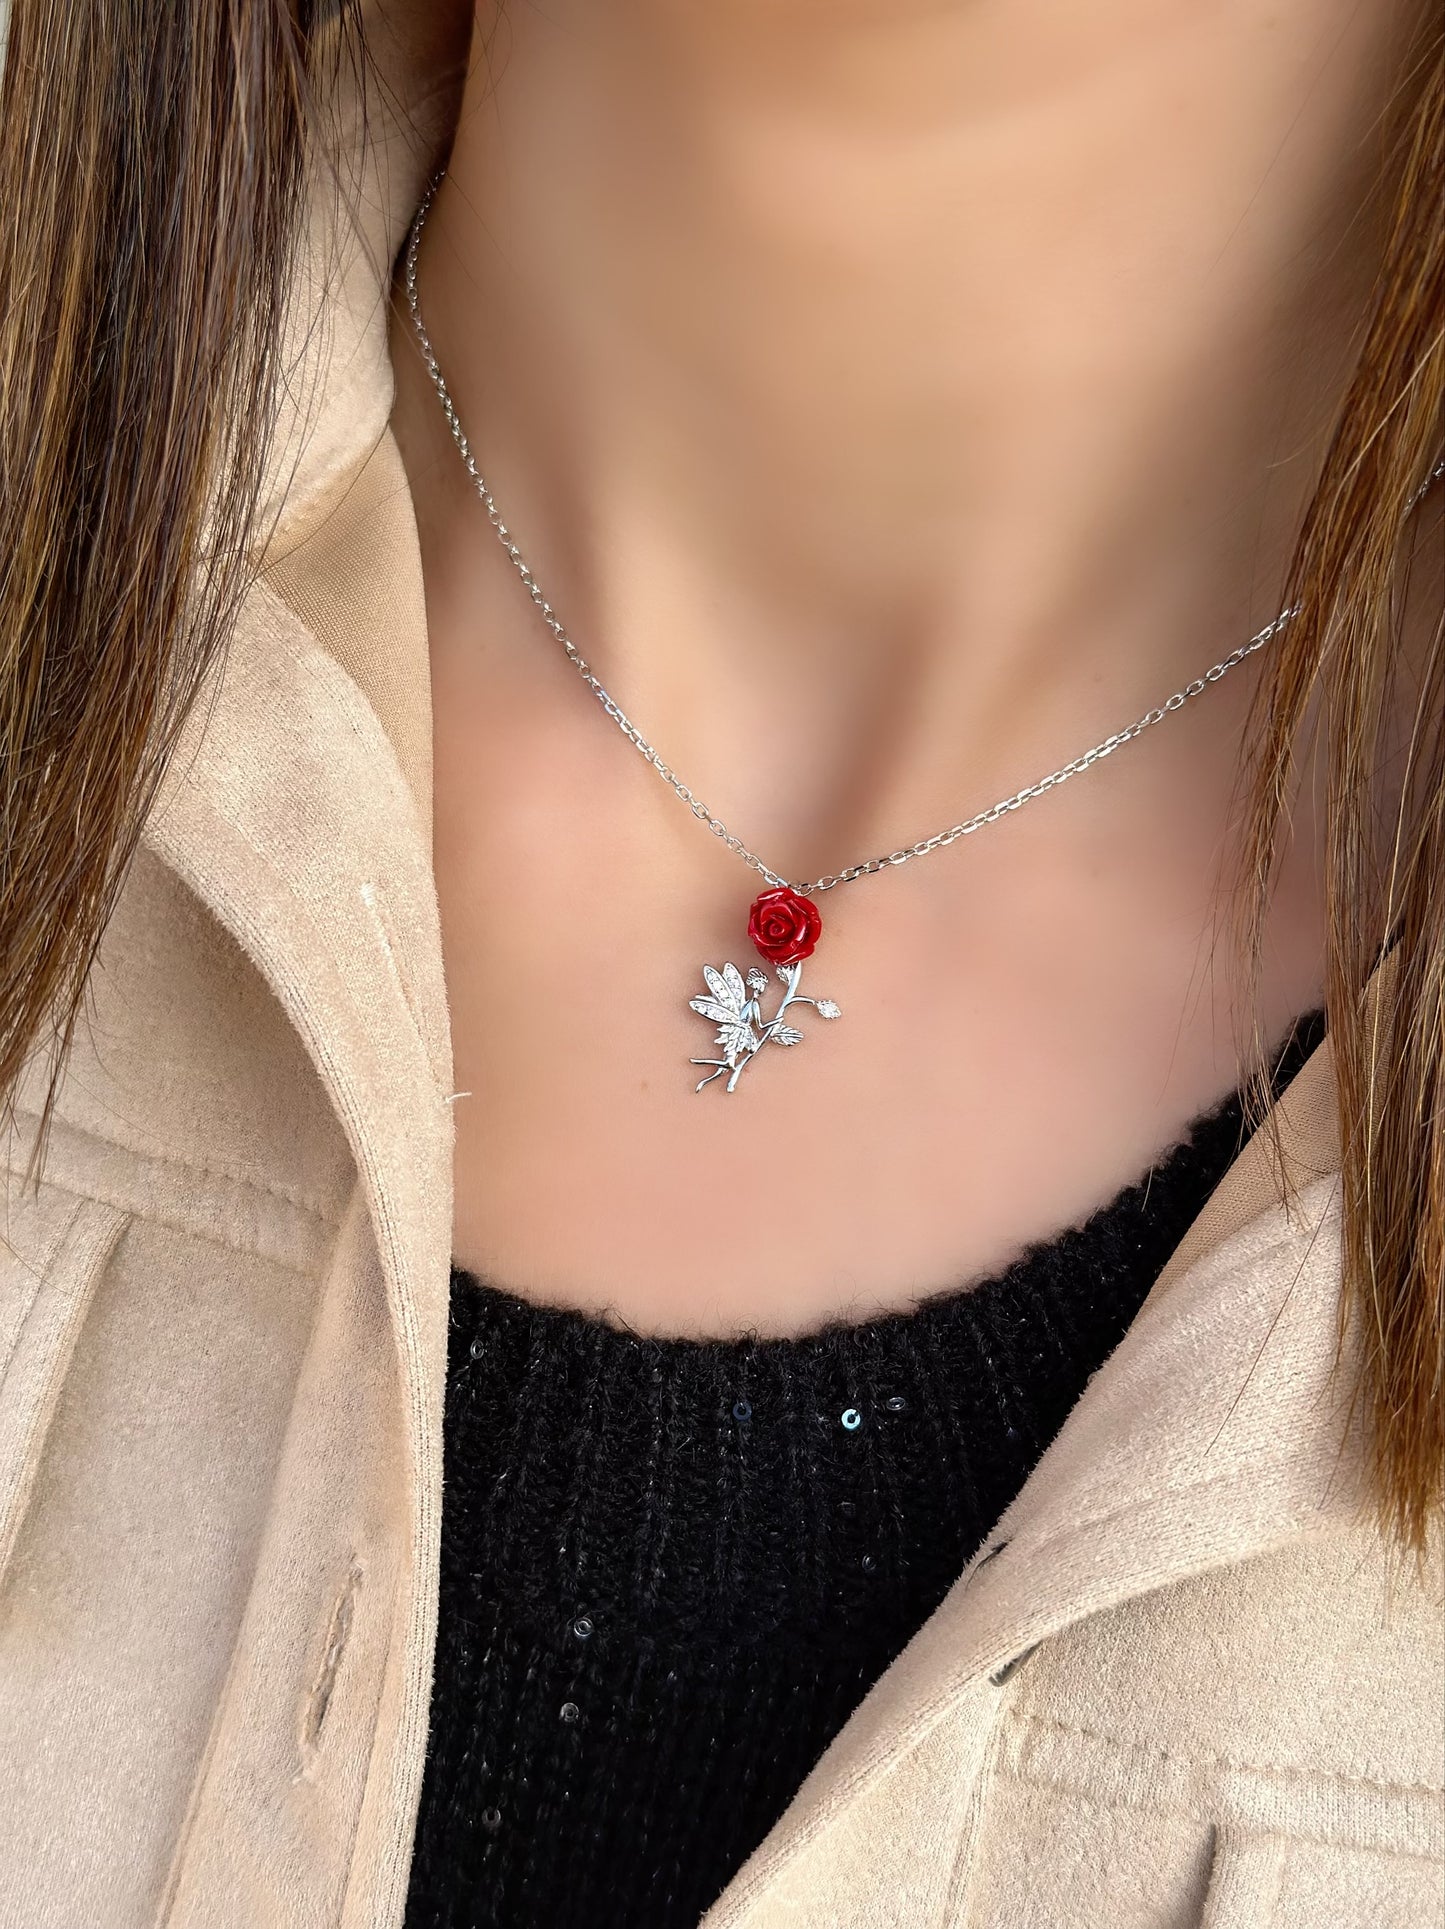 Red Flower With Tinker Bell Necklace